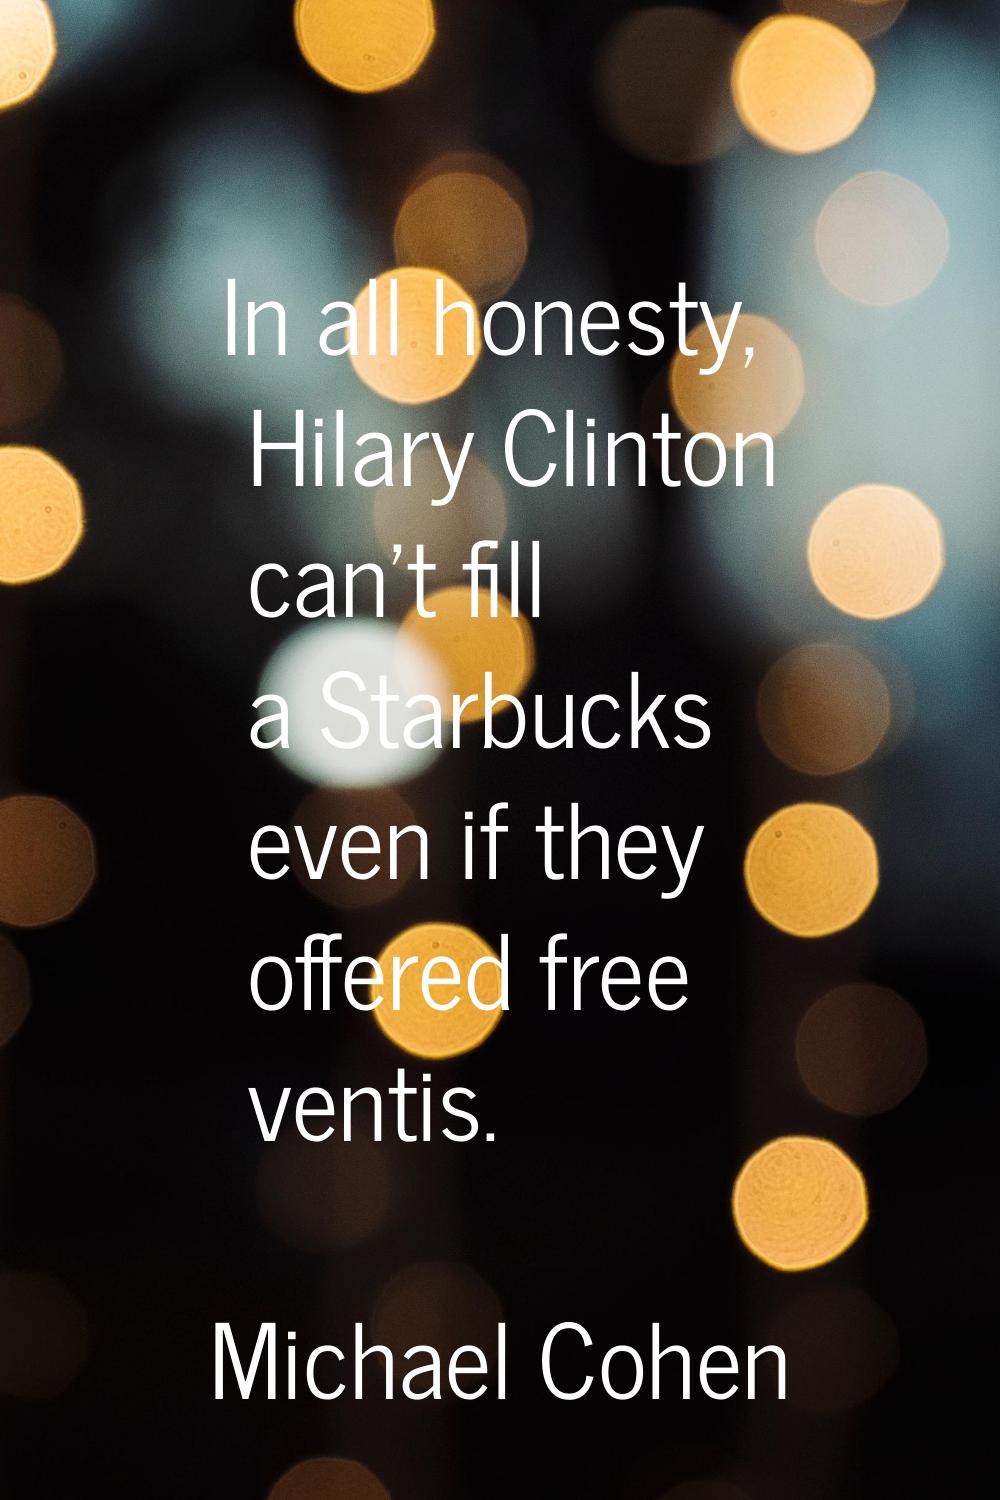 In all honesty, Hilary Clinton can't fill a Starbucks even if they offered free ventis.